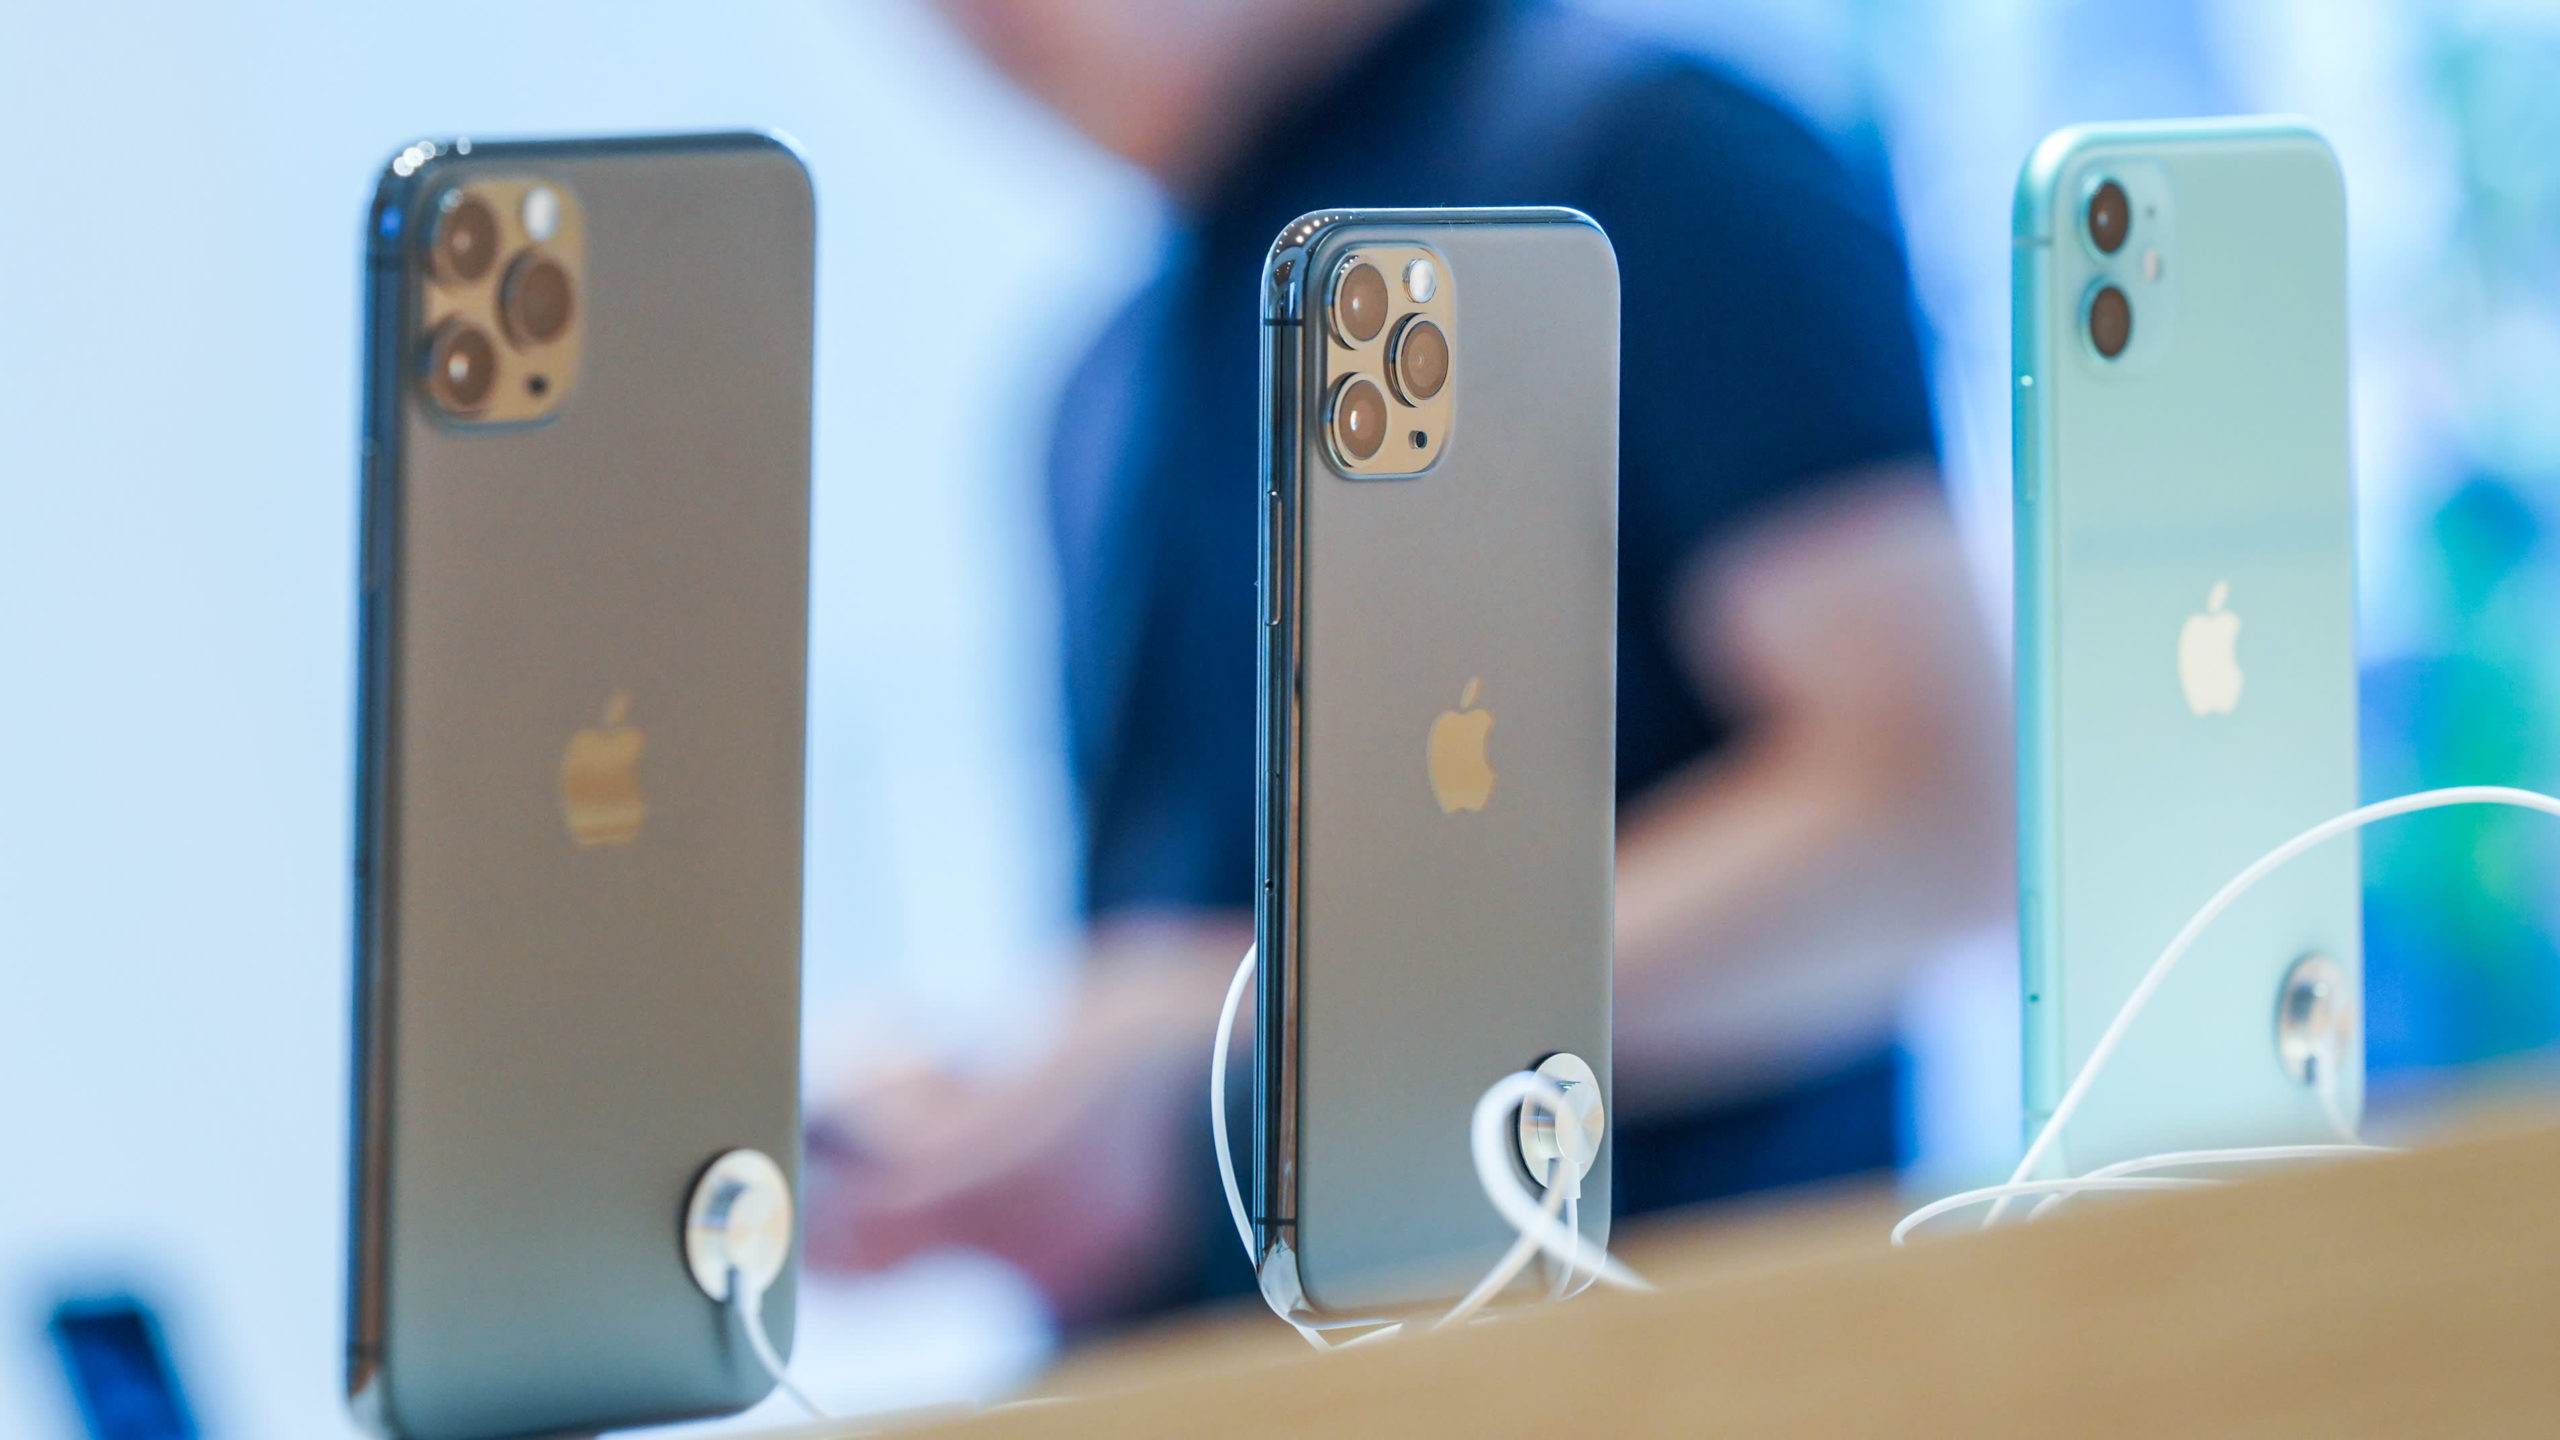 Apple explains unauthorized location data collection on iPhone 11 Pro